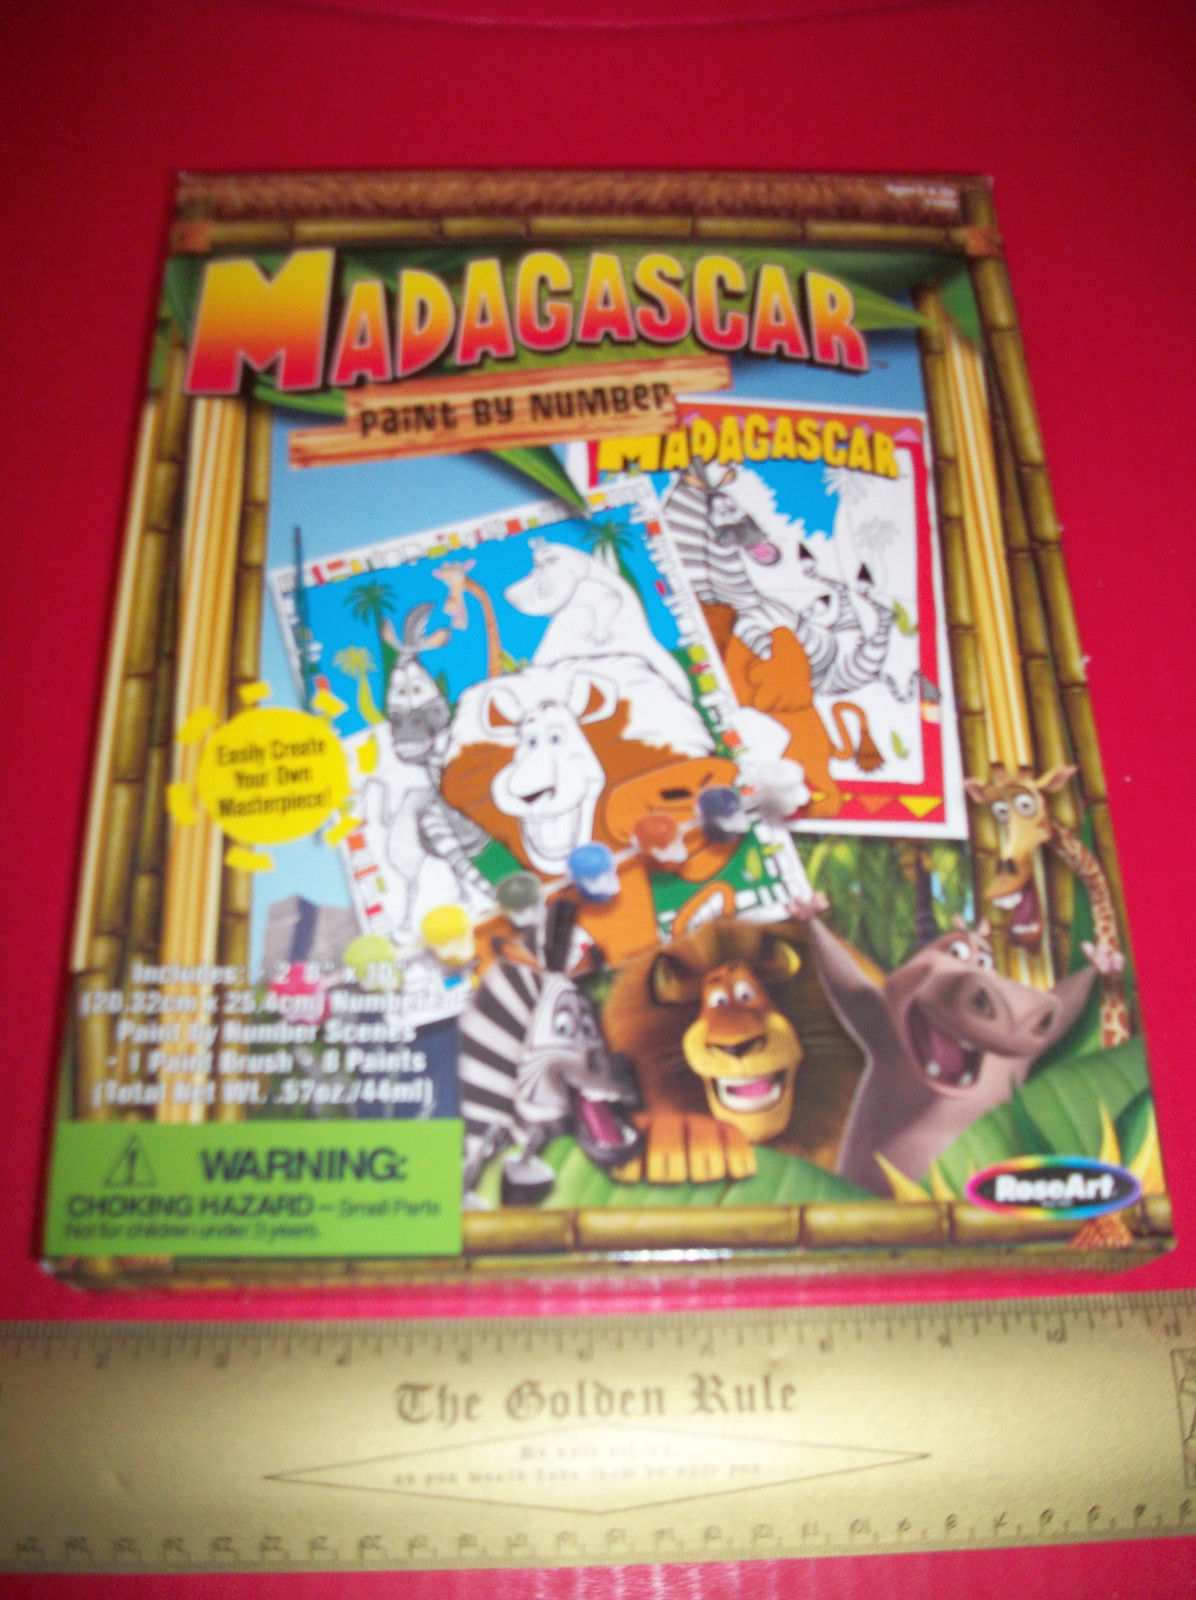 Madagascar Cartoon Craft Kit Paint By Number Activity Set RoseArt Paint Art Toy - $14.24